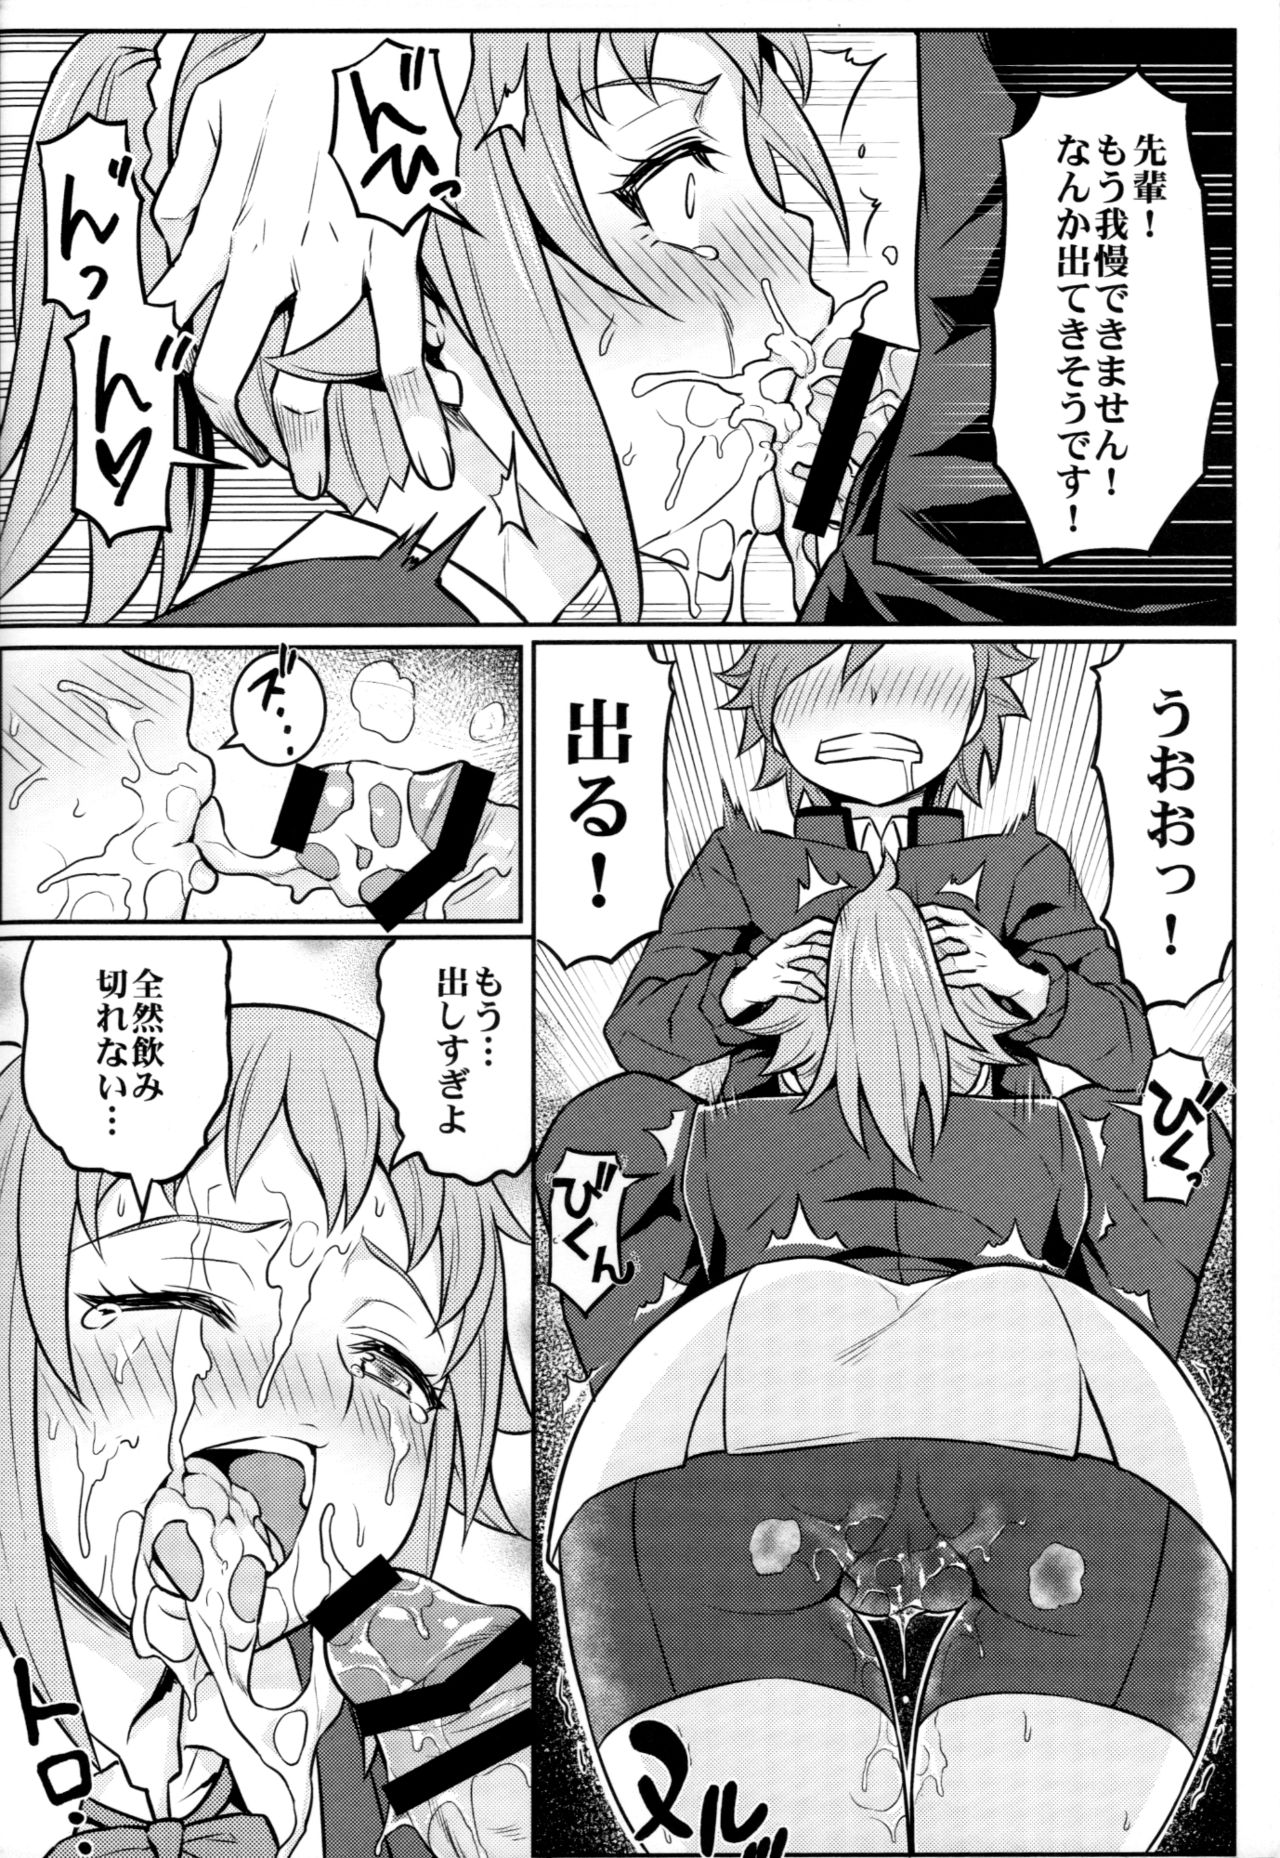 (C87) [Green Ketchup (Zhen Lu)] Nayamashii Fighters (Gundam Build Fighters Try) page 9 full